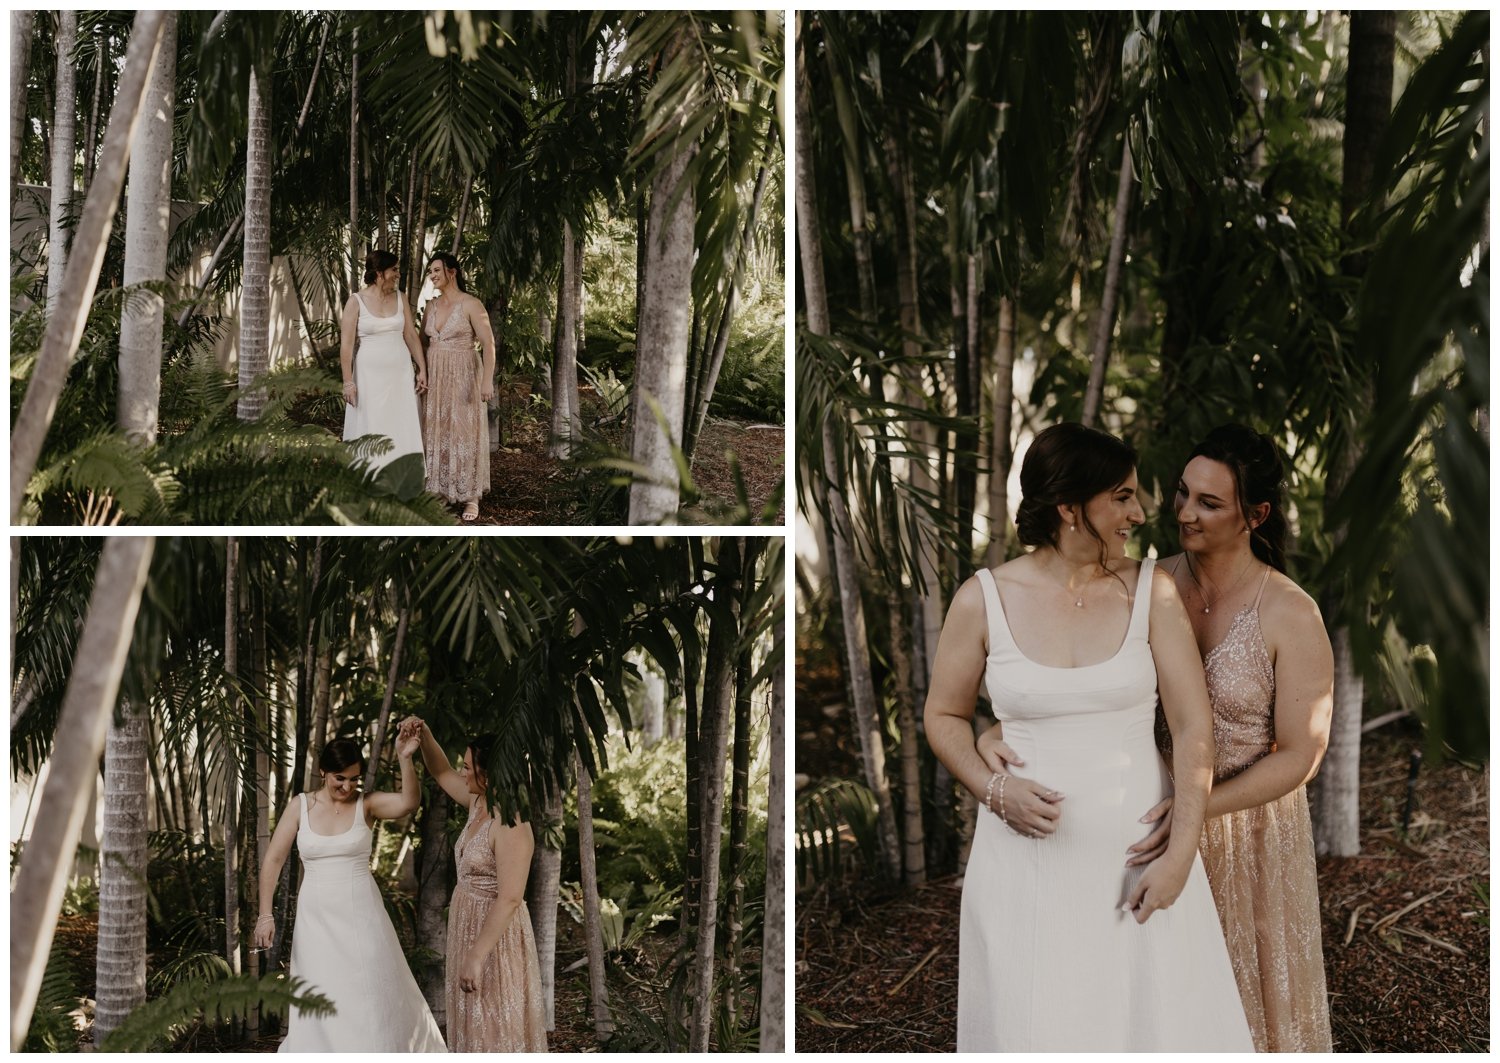 Mel and Gabe - Townsville Destination Wedding - Tay and Francis Photography_0029.jpg